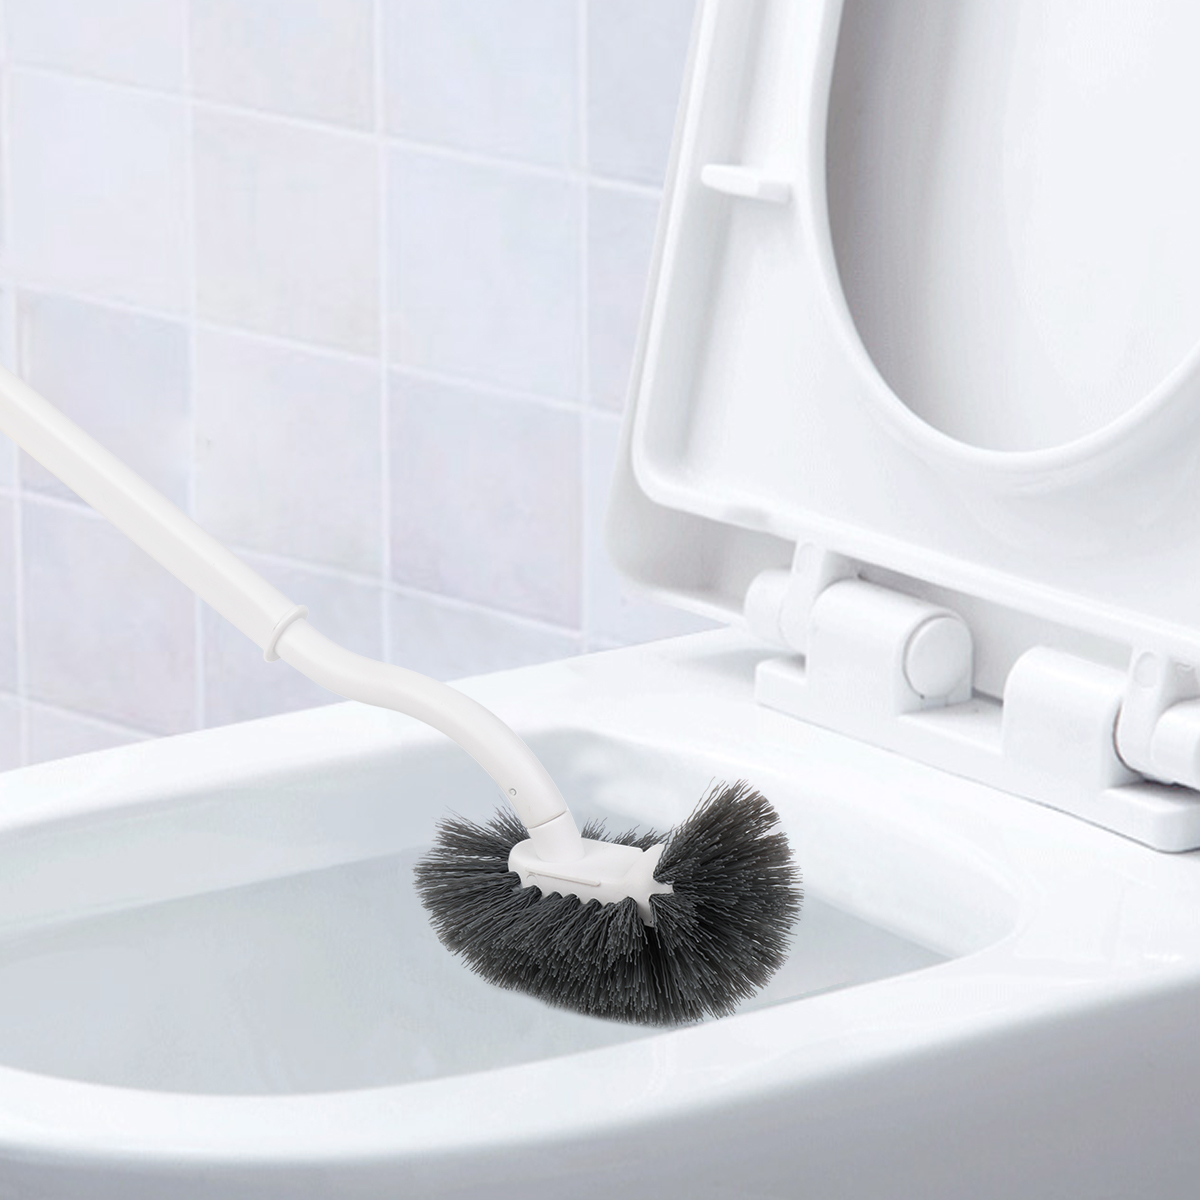 Toilet Bowl Brush, Curved Design Angled Cleaner Brush Scrubber for Deep Cleaning